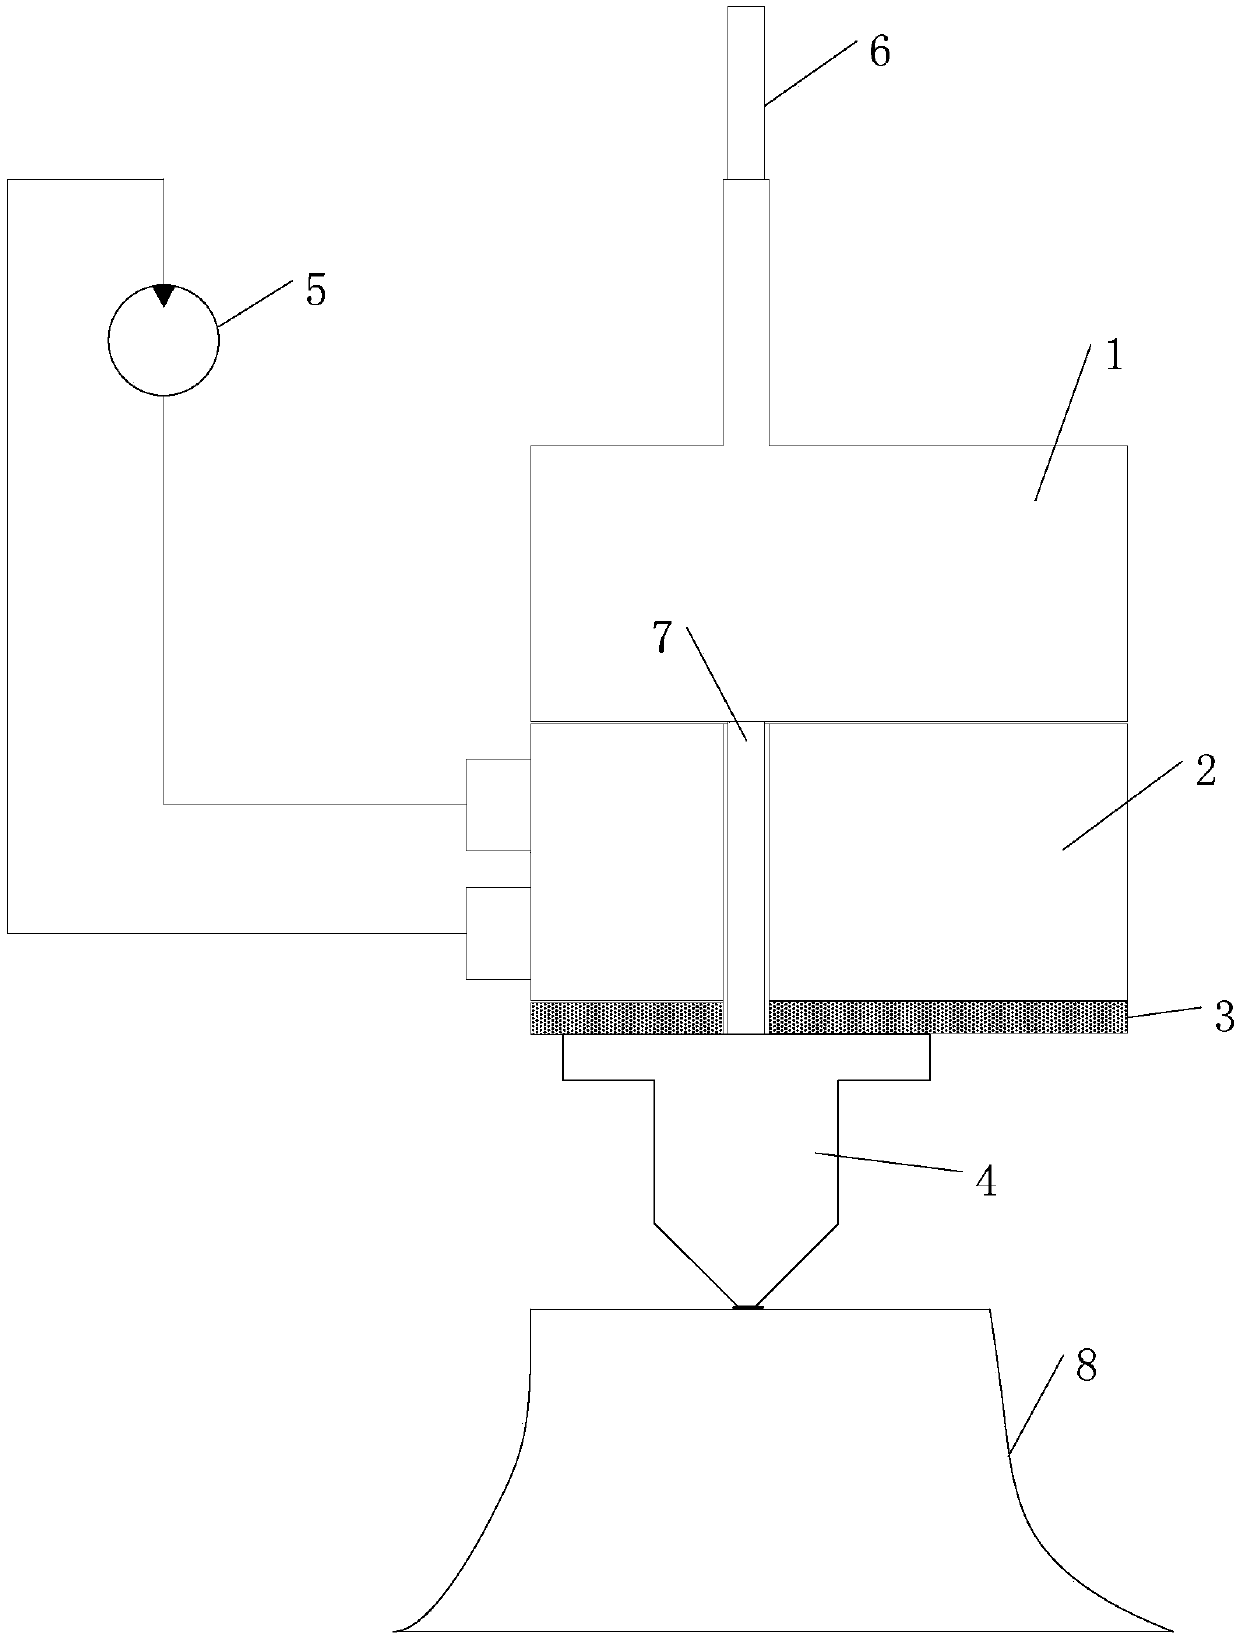 A melting control device and method for 3D printing